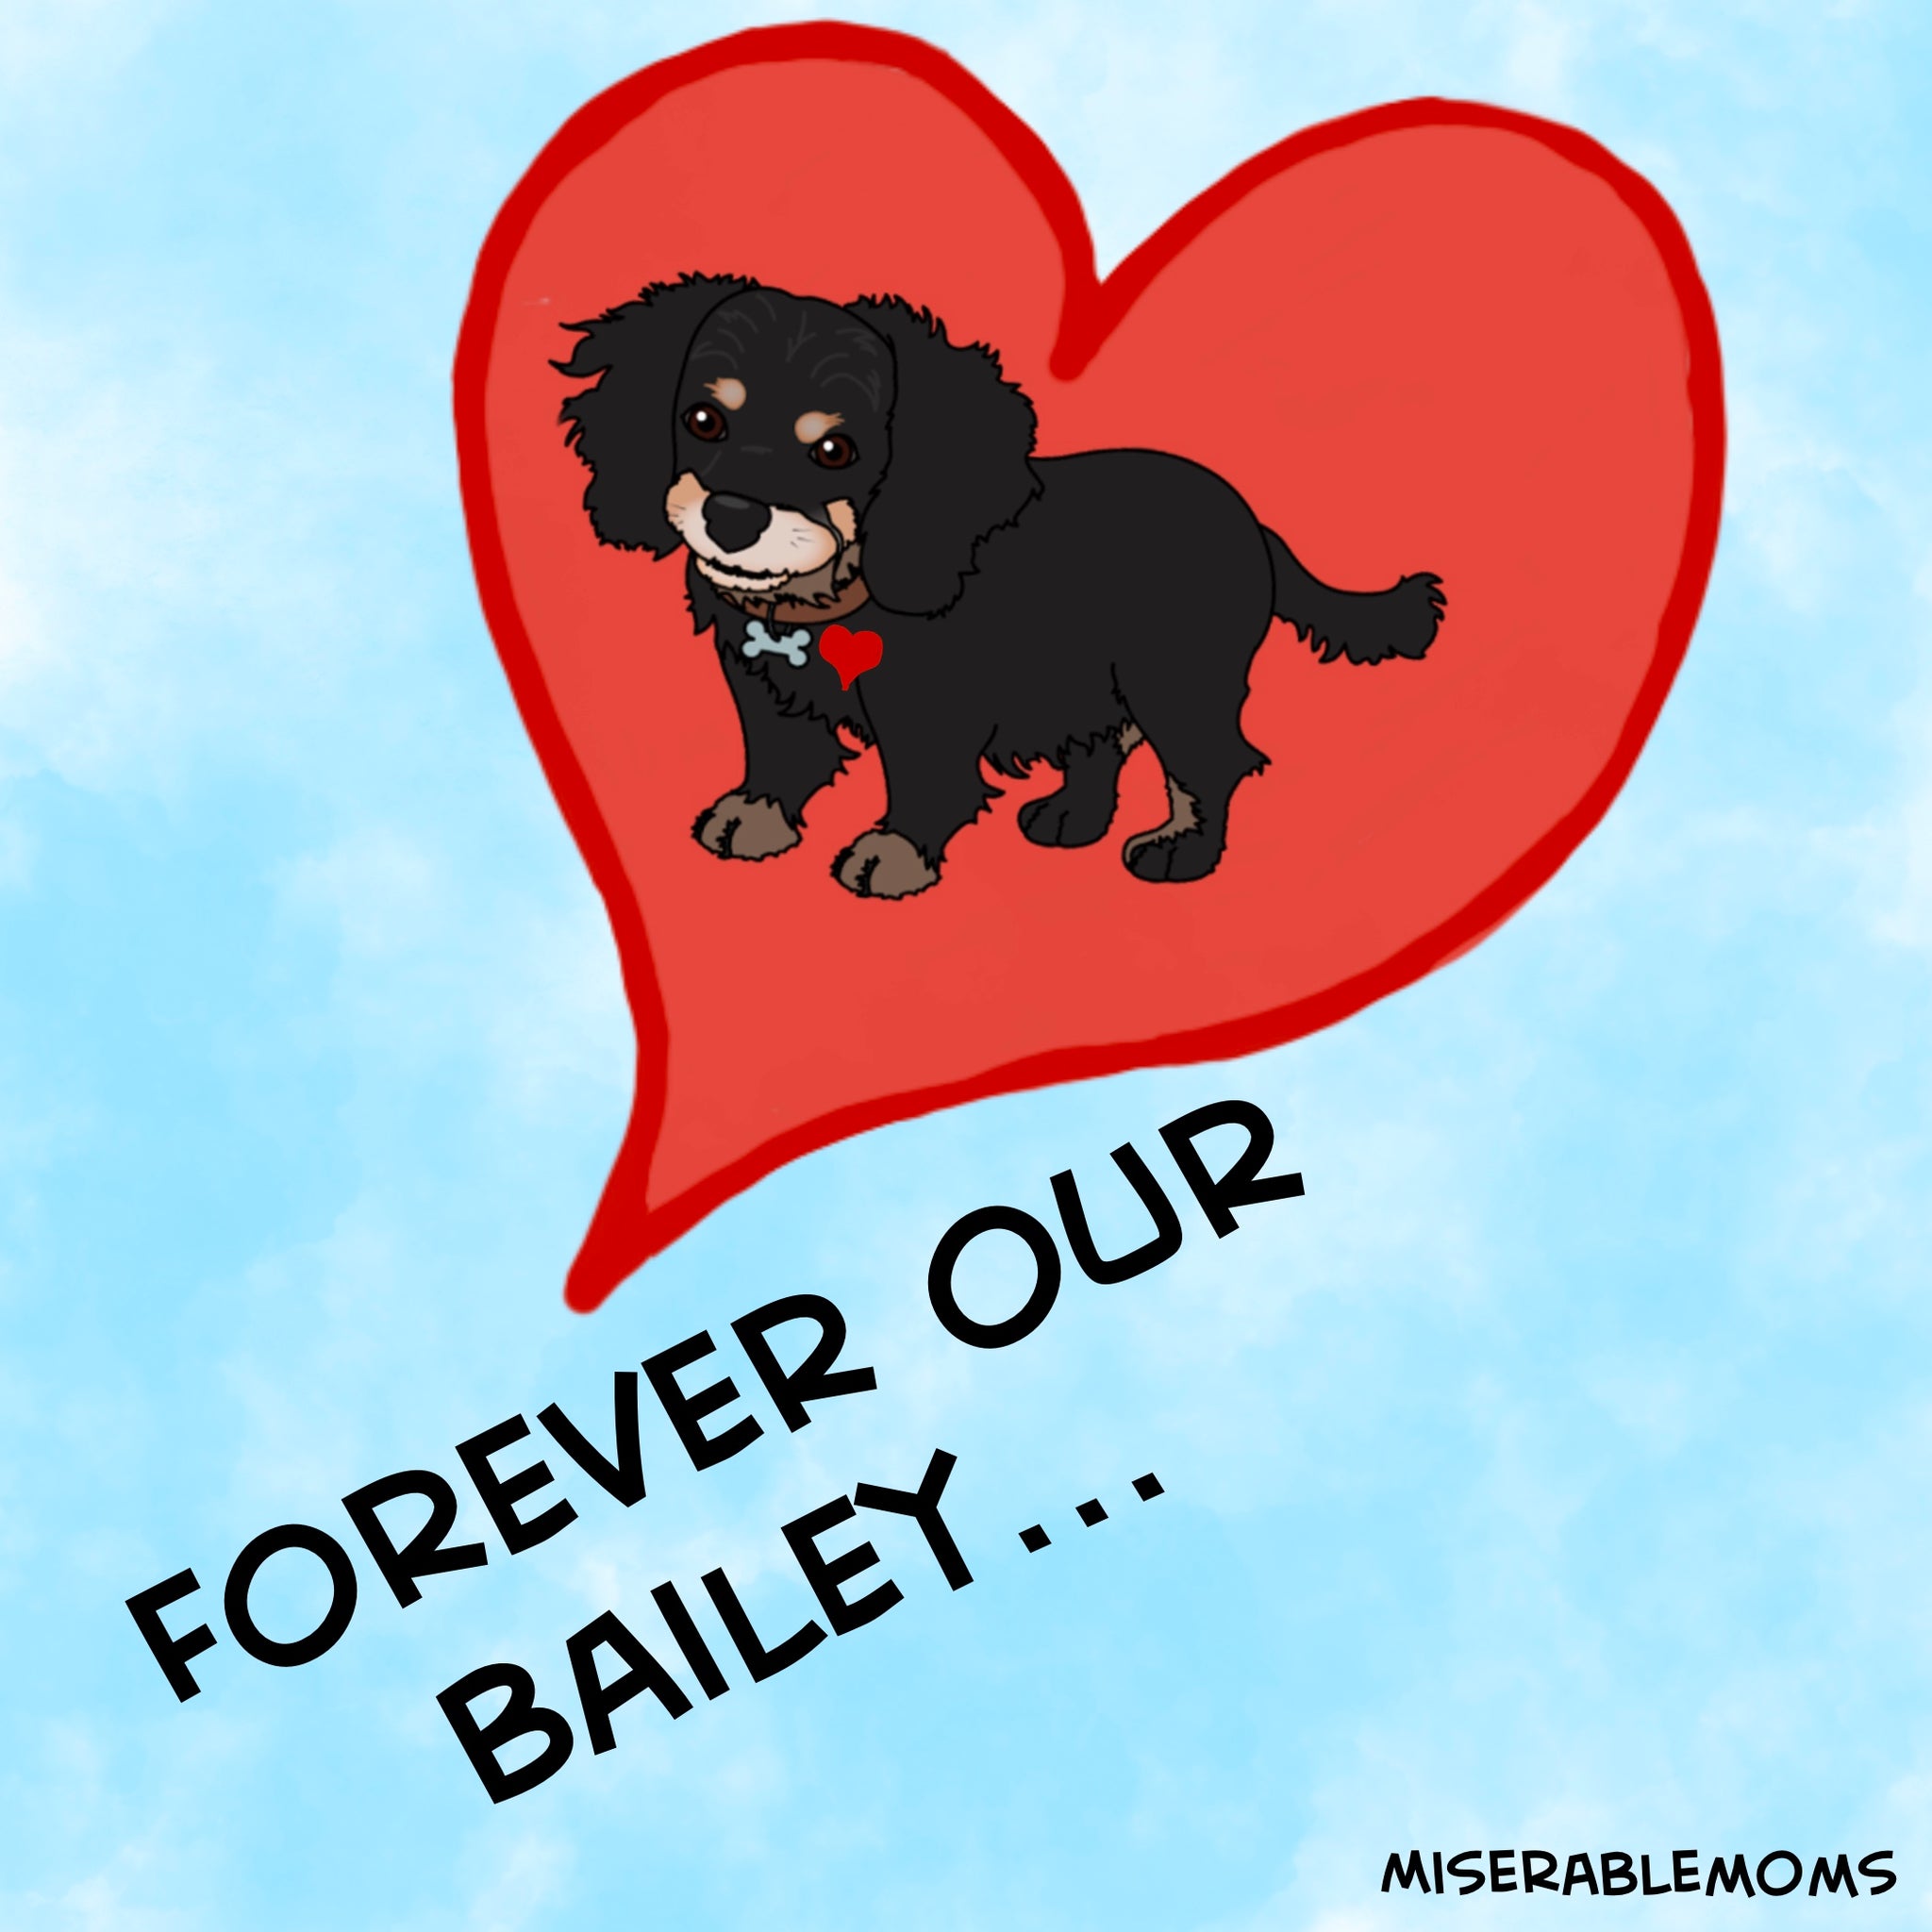 Losing Bailey: The Passing of Our Family Pet